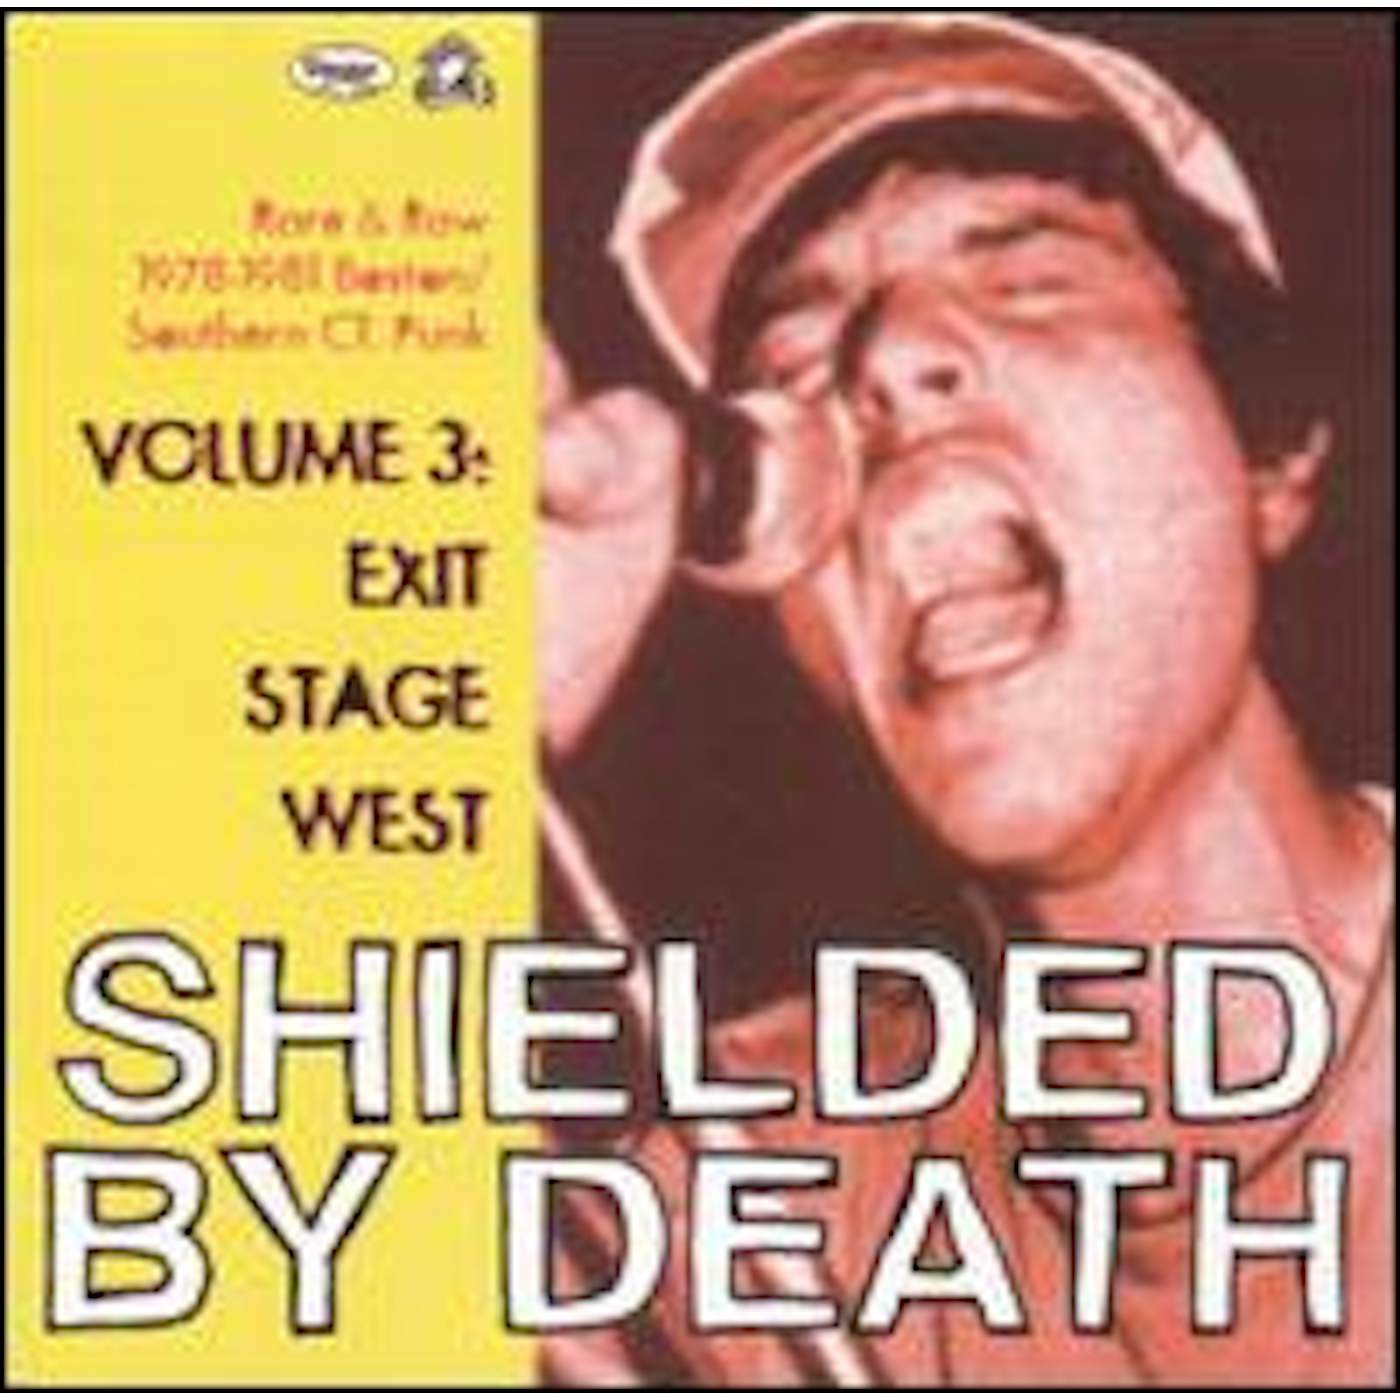 SHIELDED BY DEATH 3: EXIT STAGE WEST / VARIOUS Vinyl Record